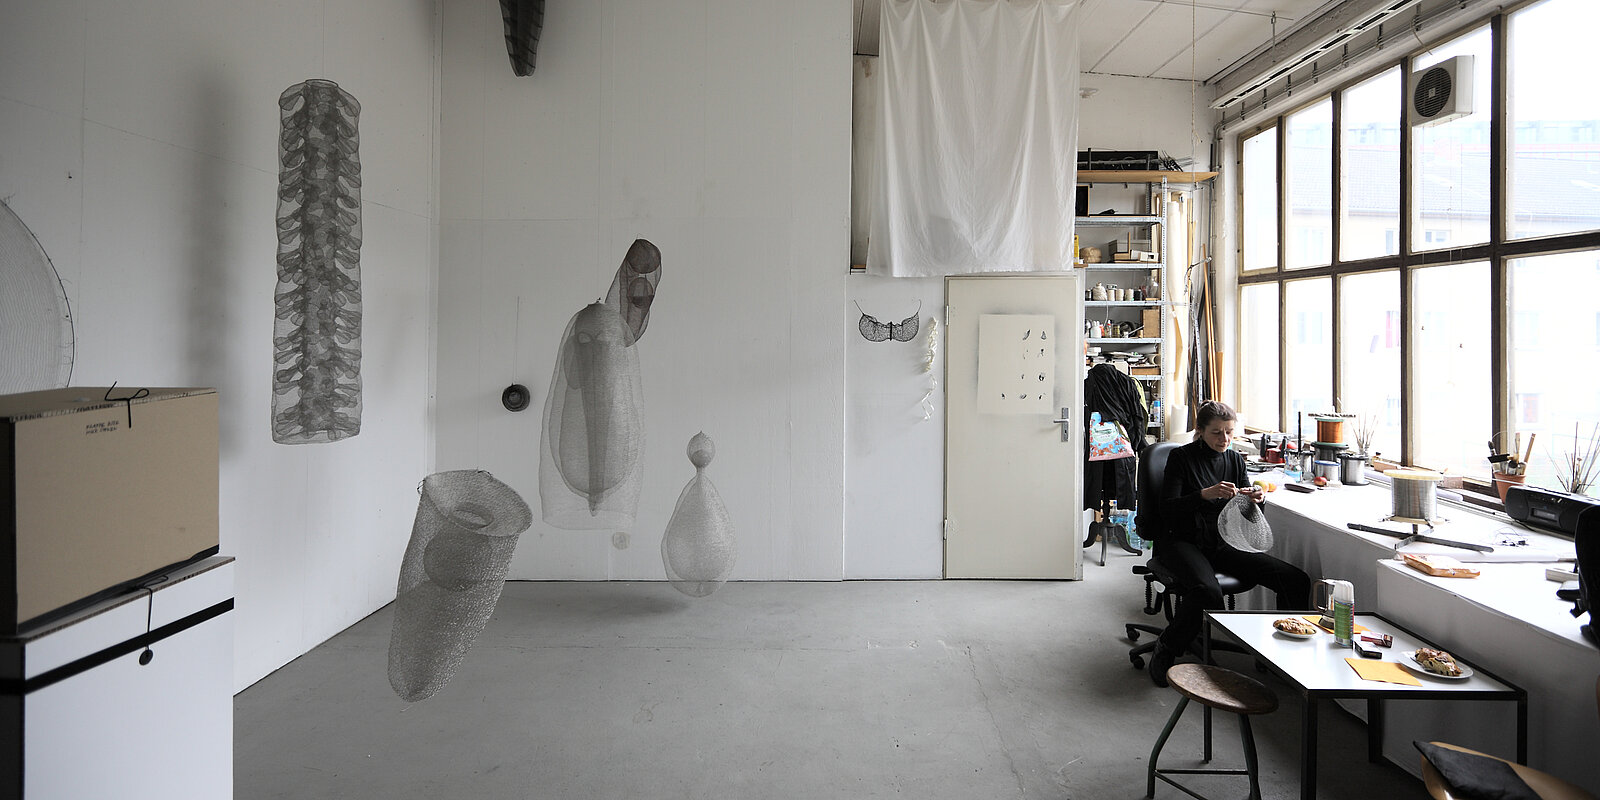 Luise Unger dans son atelier, Cologne 2015. Photo: Alistair Overbruck